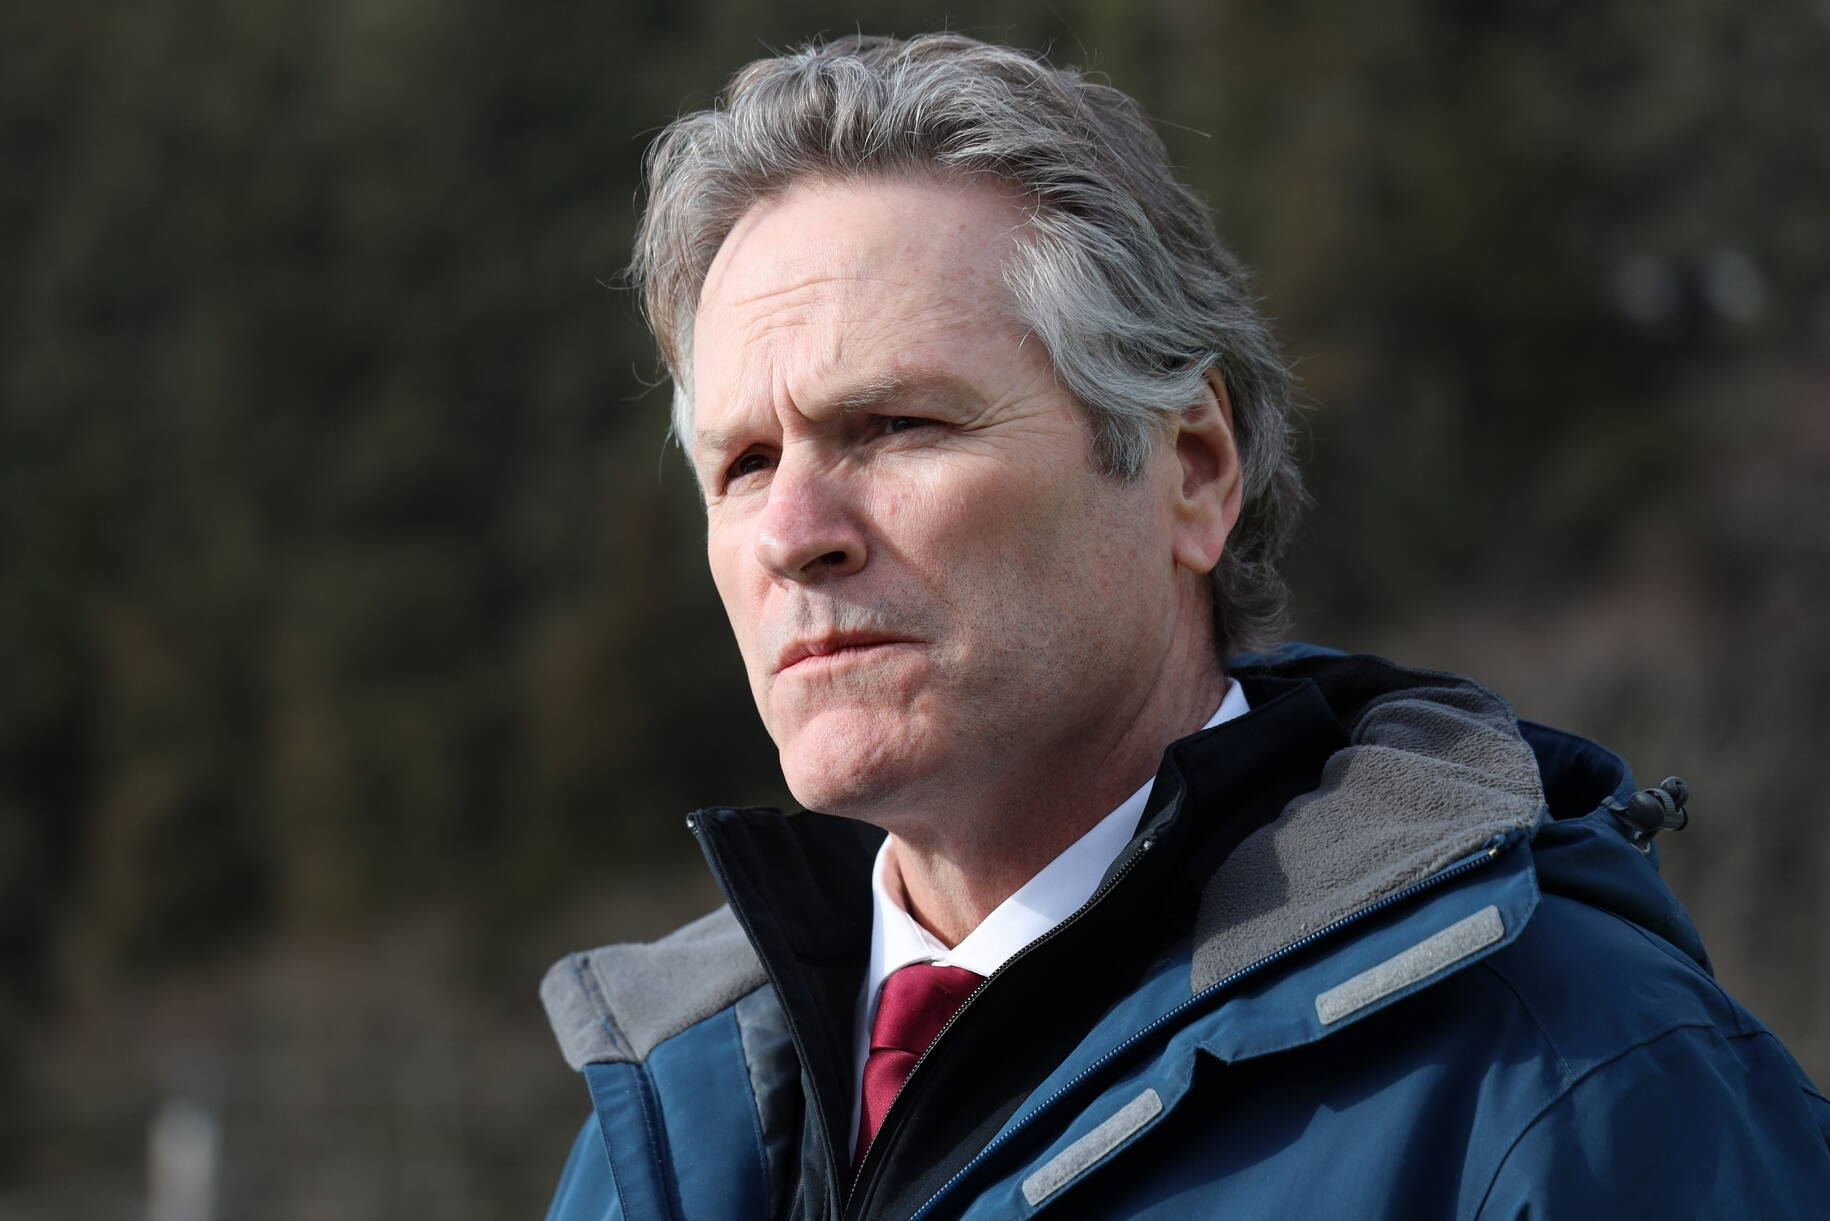 Gov. Mike Dunleavy, seen here at an event at the Auke Bay Ferry Terminal in March, on Tuesday issued a state disaster declaration for the Suicide Basin flood that occurred during the weekend. (Clarise Larson / Juneau Empire File)